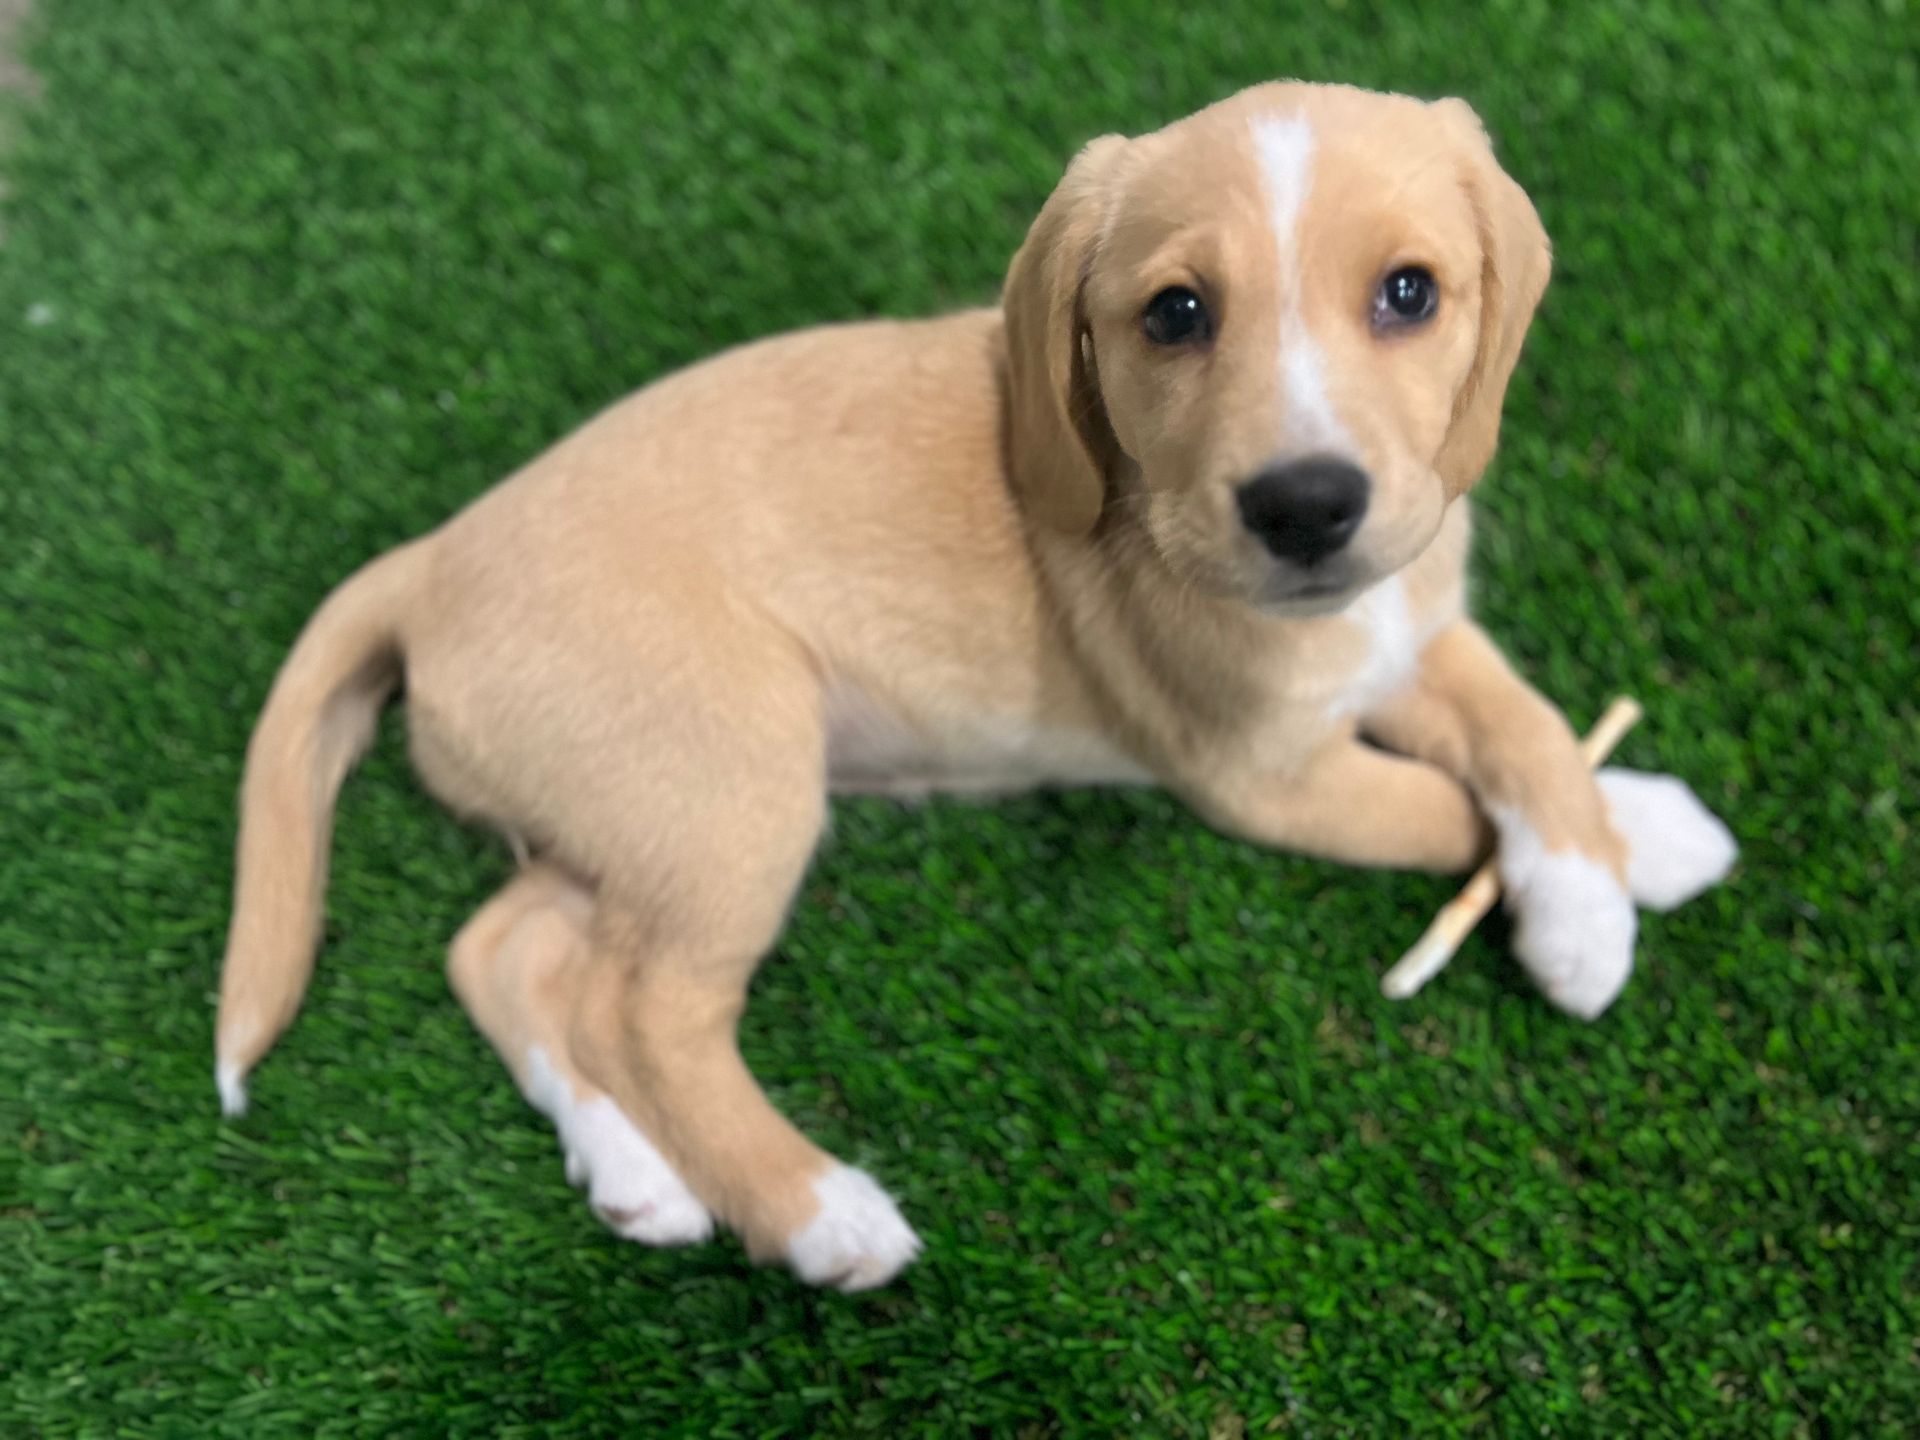 puppy on artificial pet turf